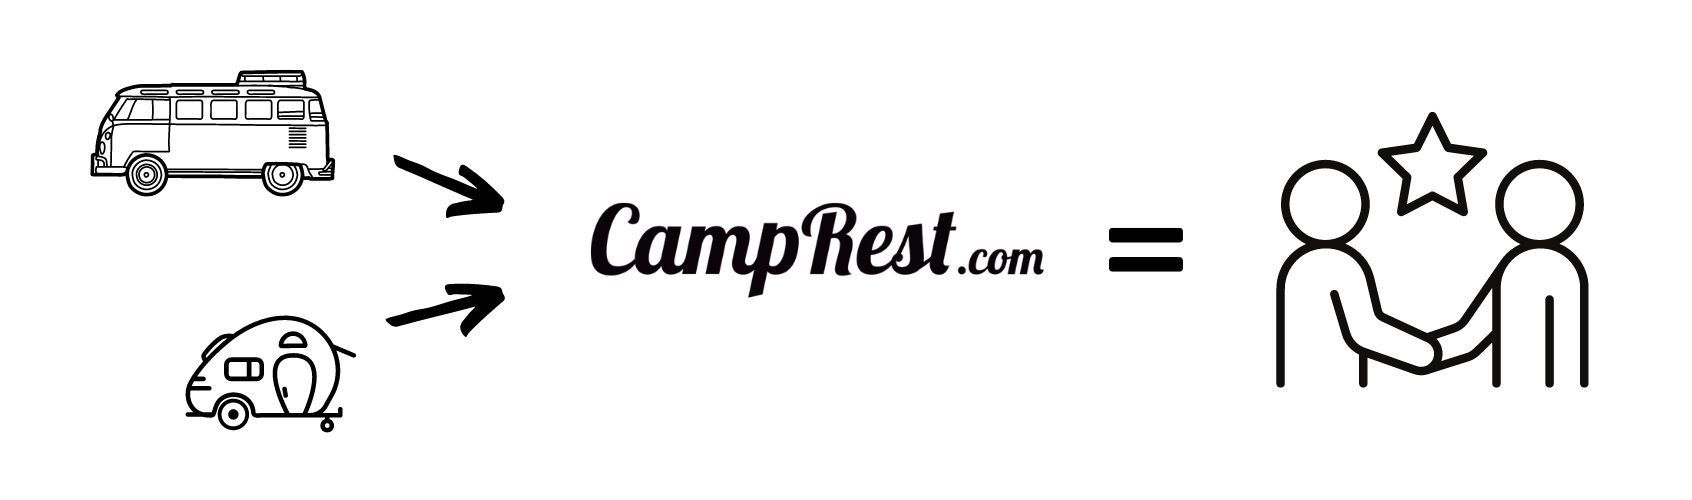 Camptoo - bankruptcy on a large scale – image 1